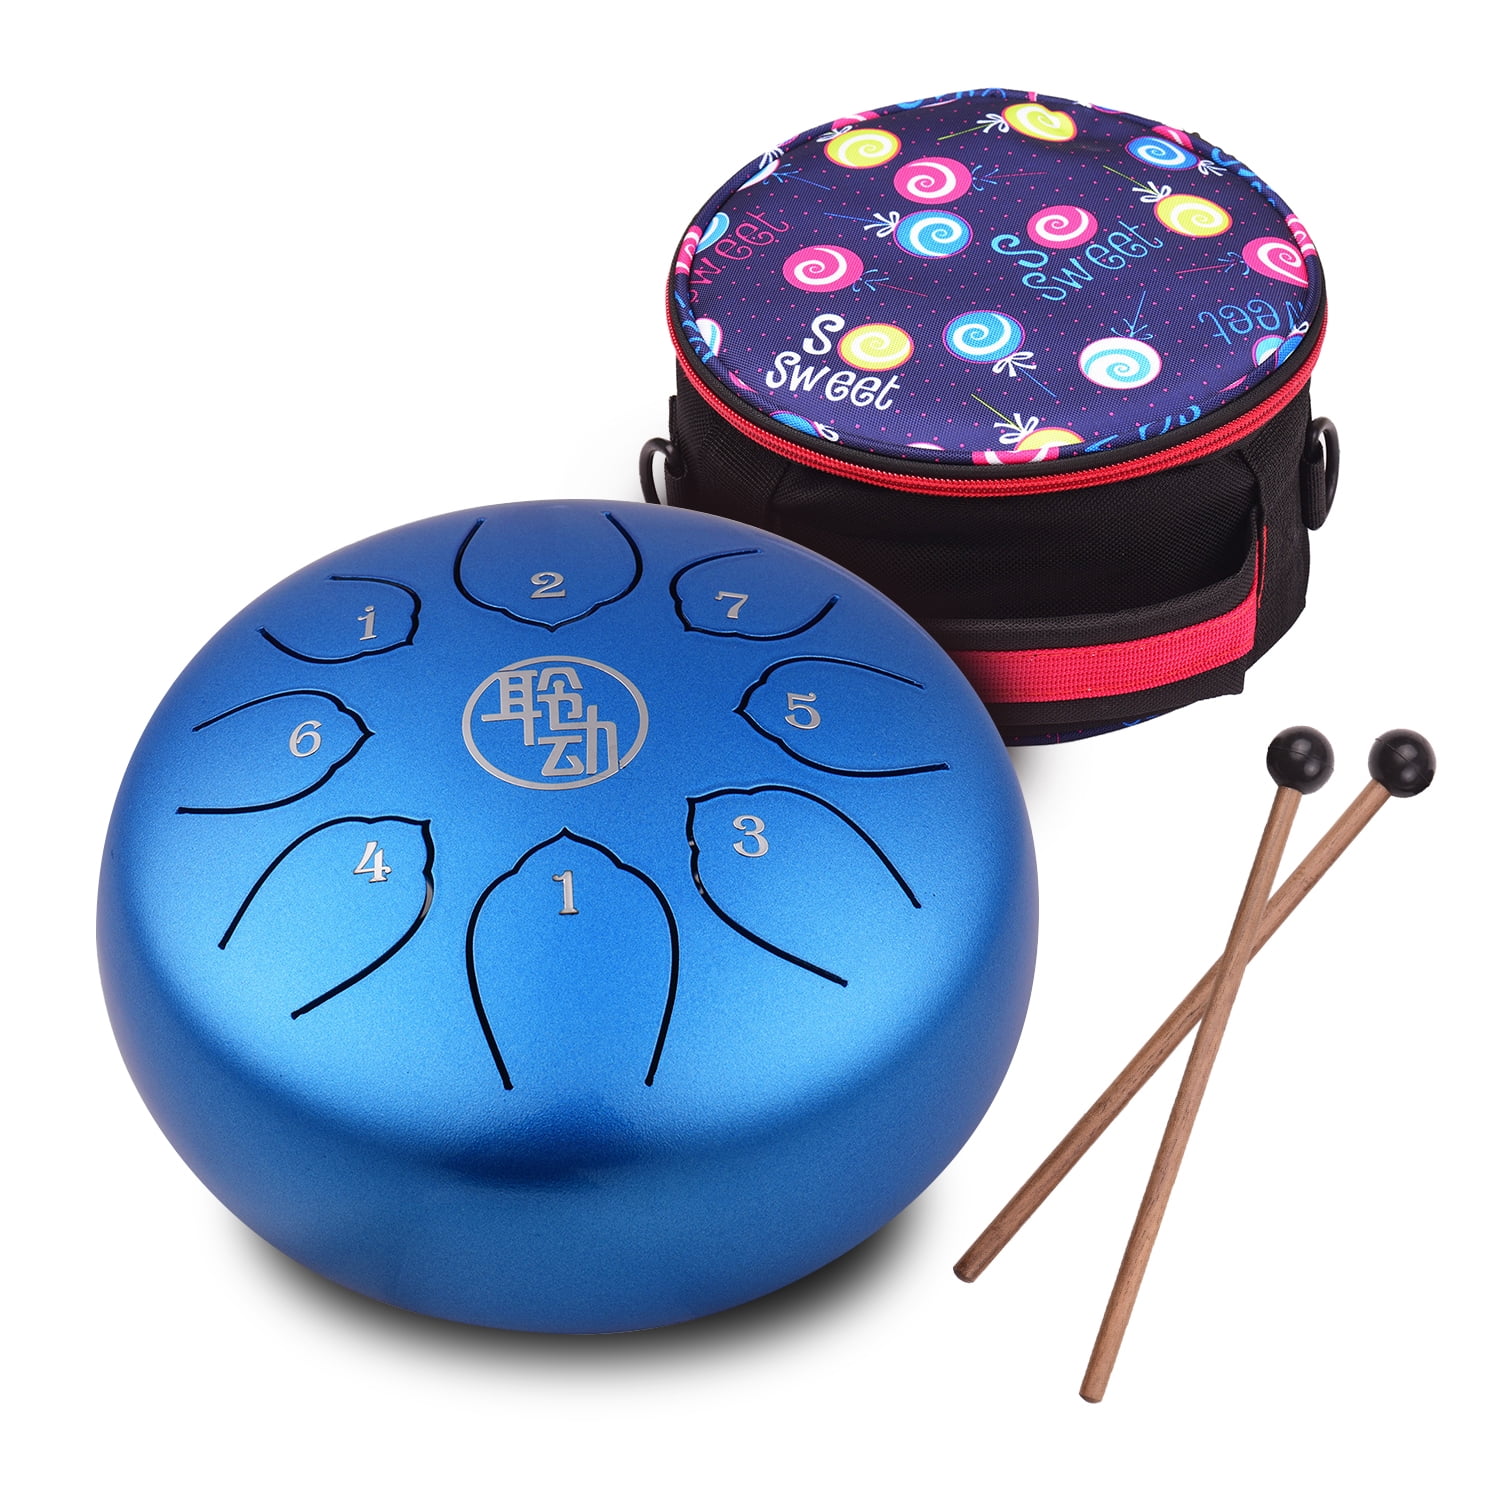 Steel Tongue Drums 15 Notes Tank Drum 14 Inch D Key High Carbon Harmonic Hand Pan Handpan Drum with Rope Decoration and Mallets for Meditation Color : Brown Yoga and Zen